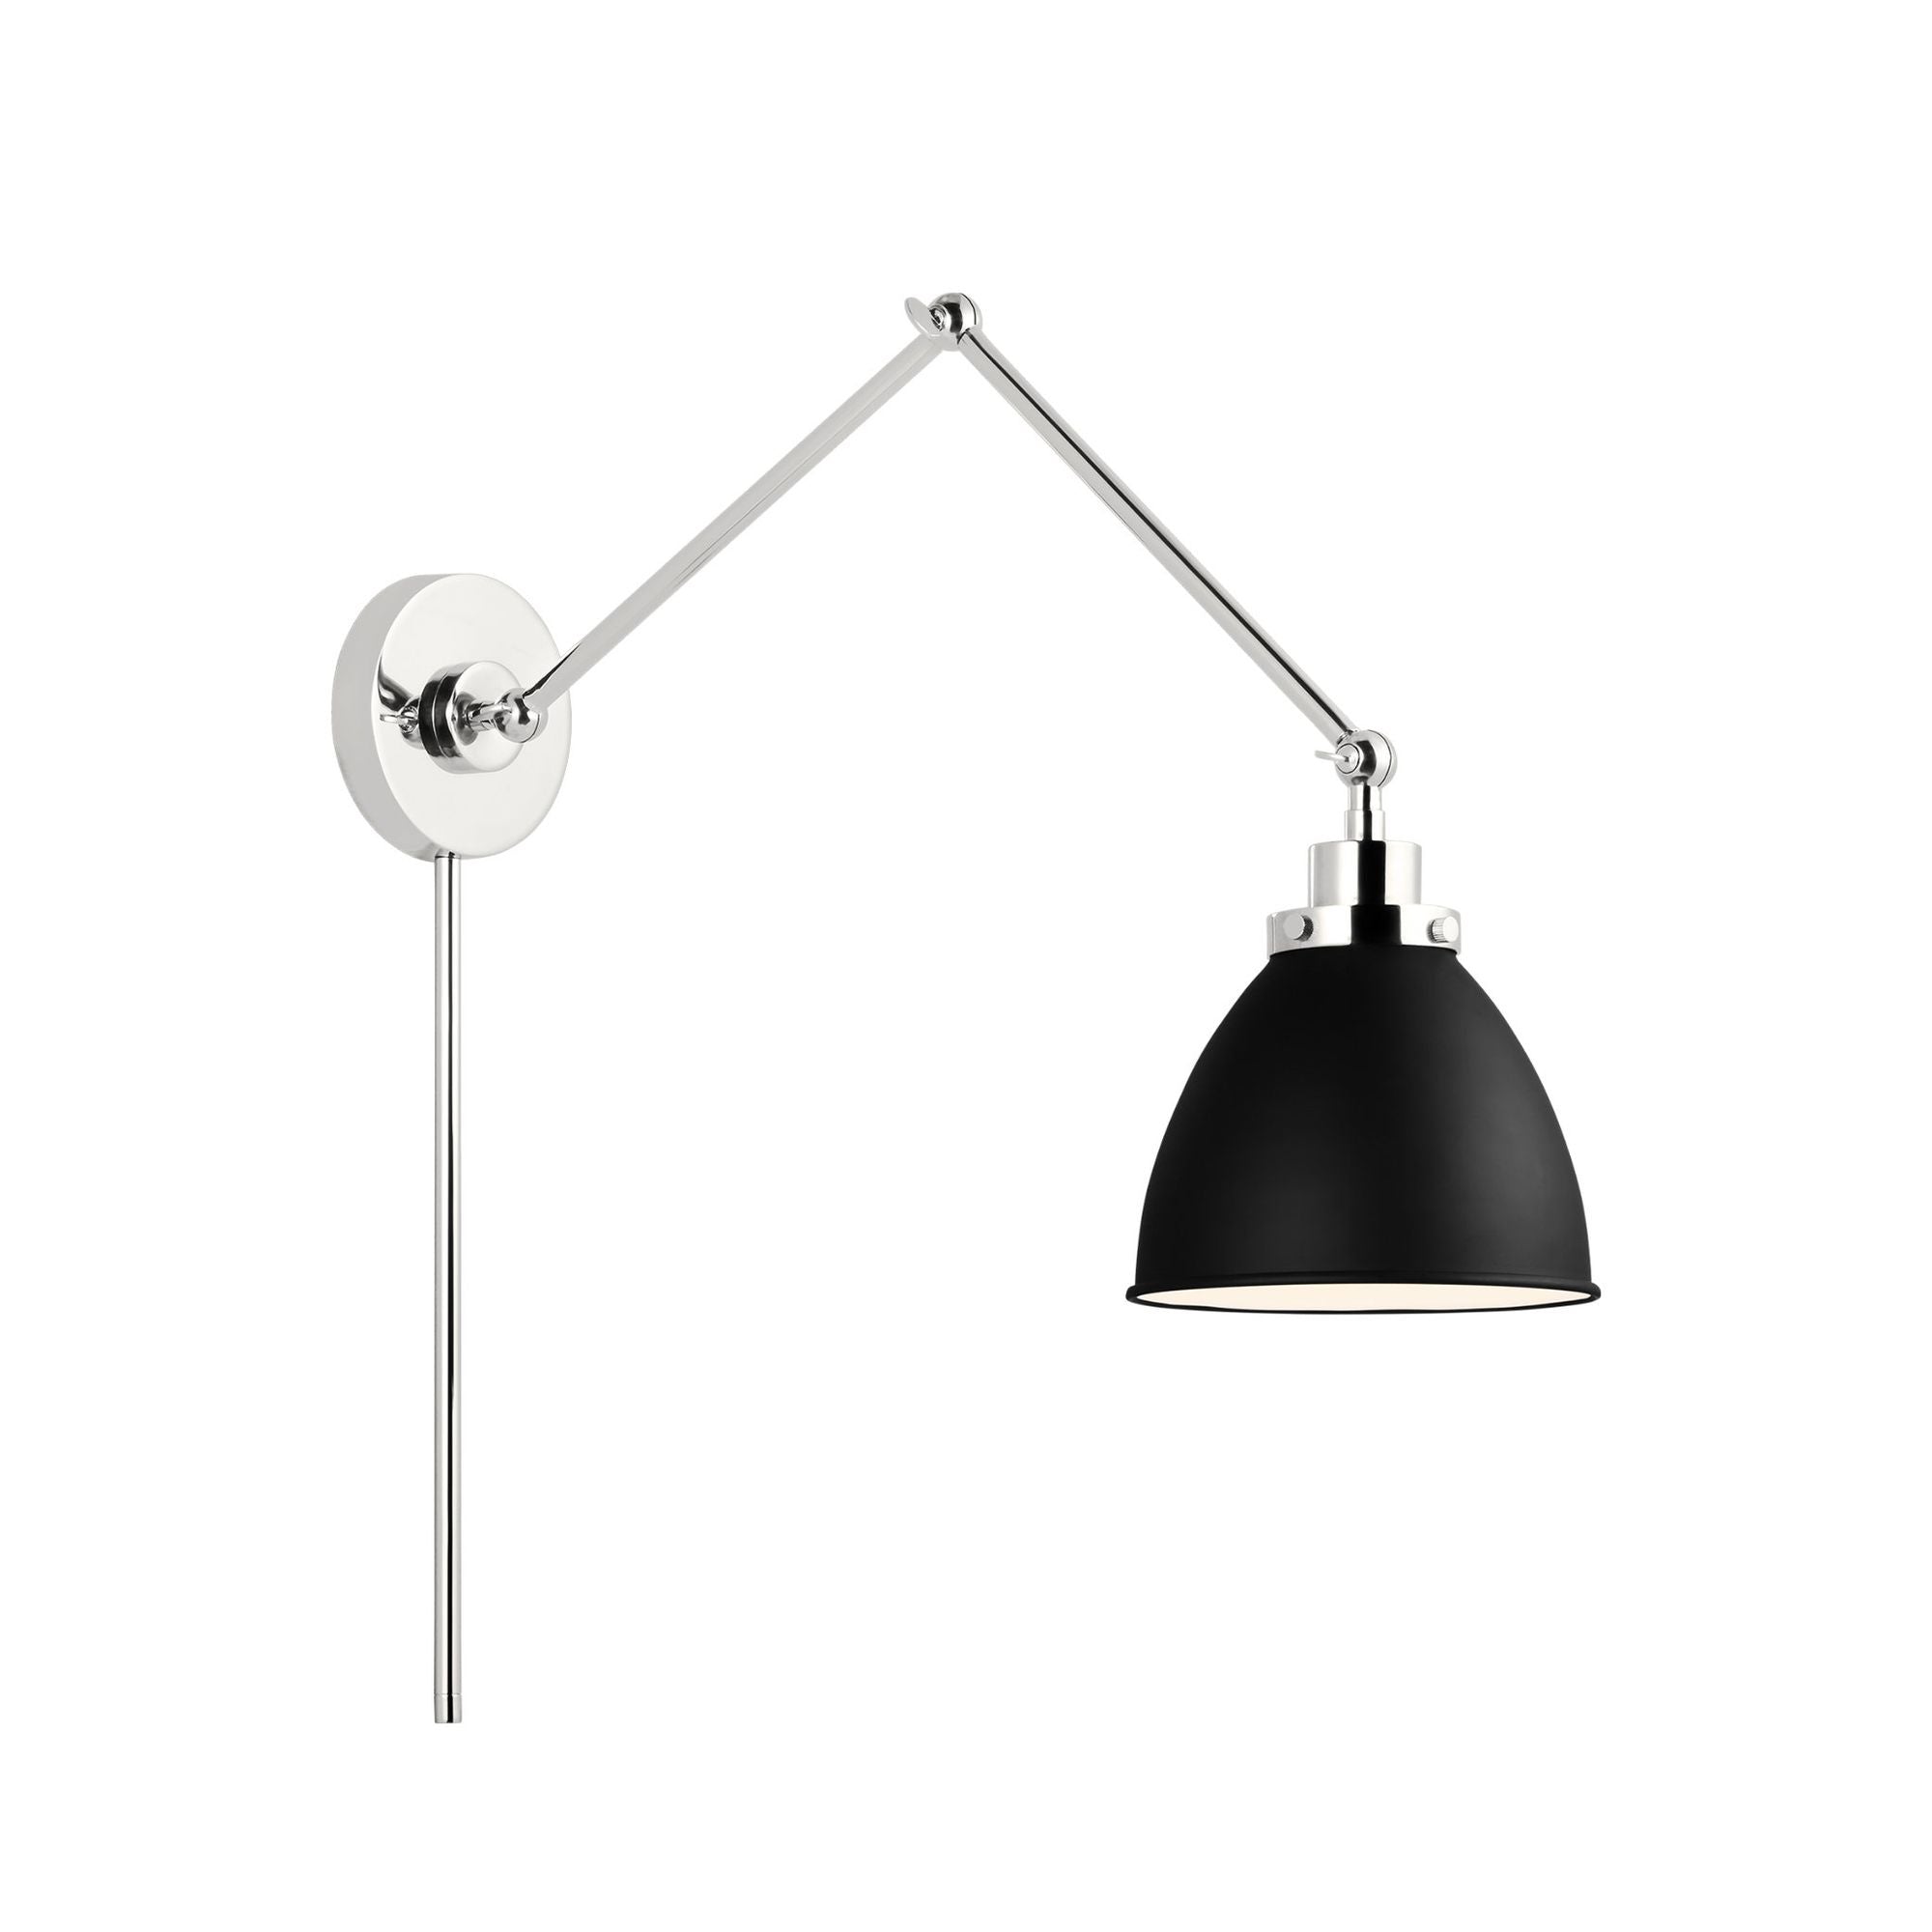 Chapman & Myers Wellfleet Double Arm Dome Task Sconce in Midnight Black and Polished Nickel